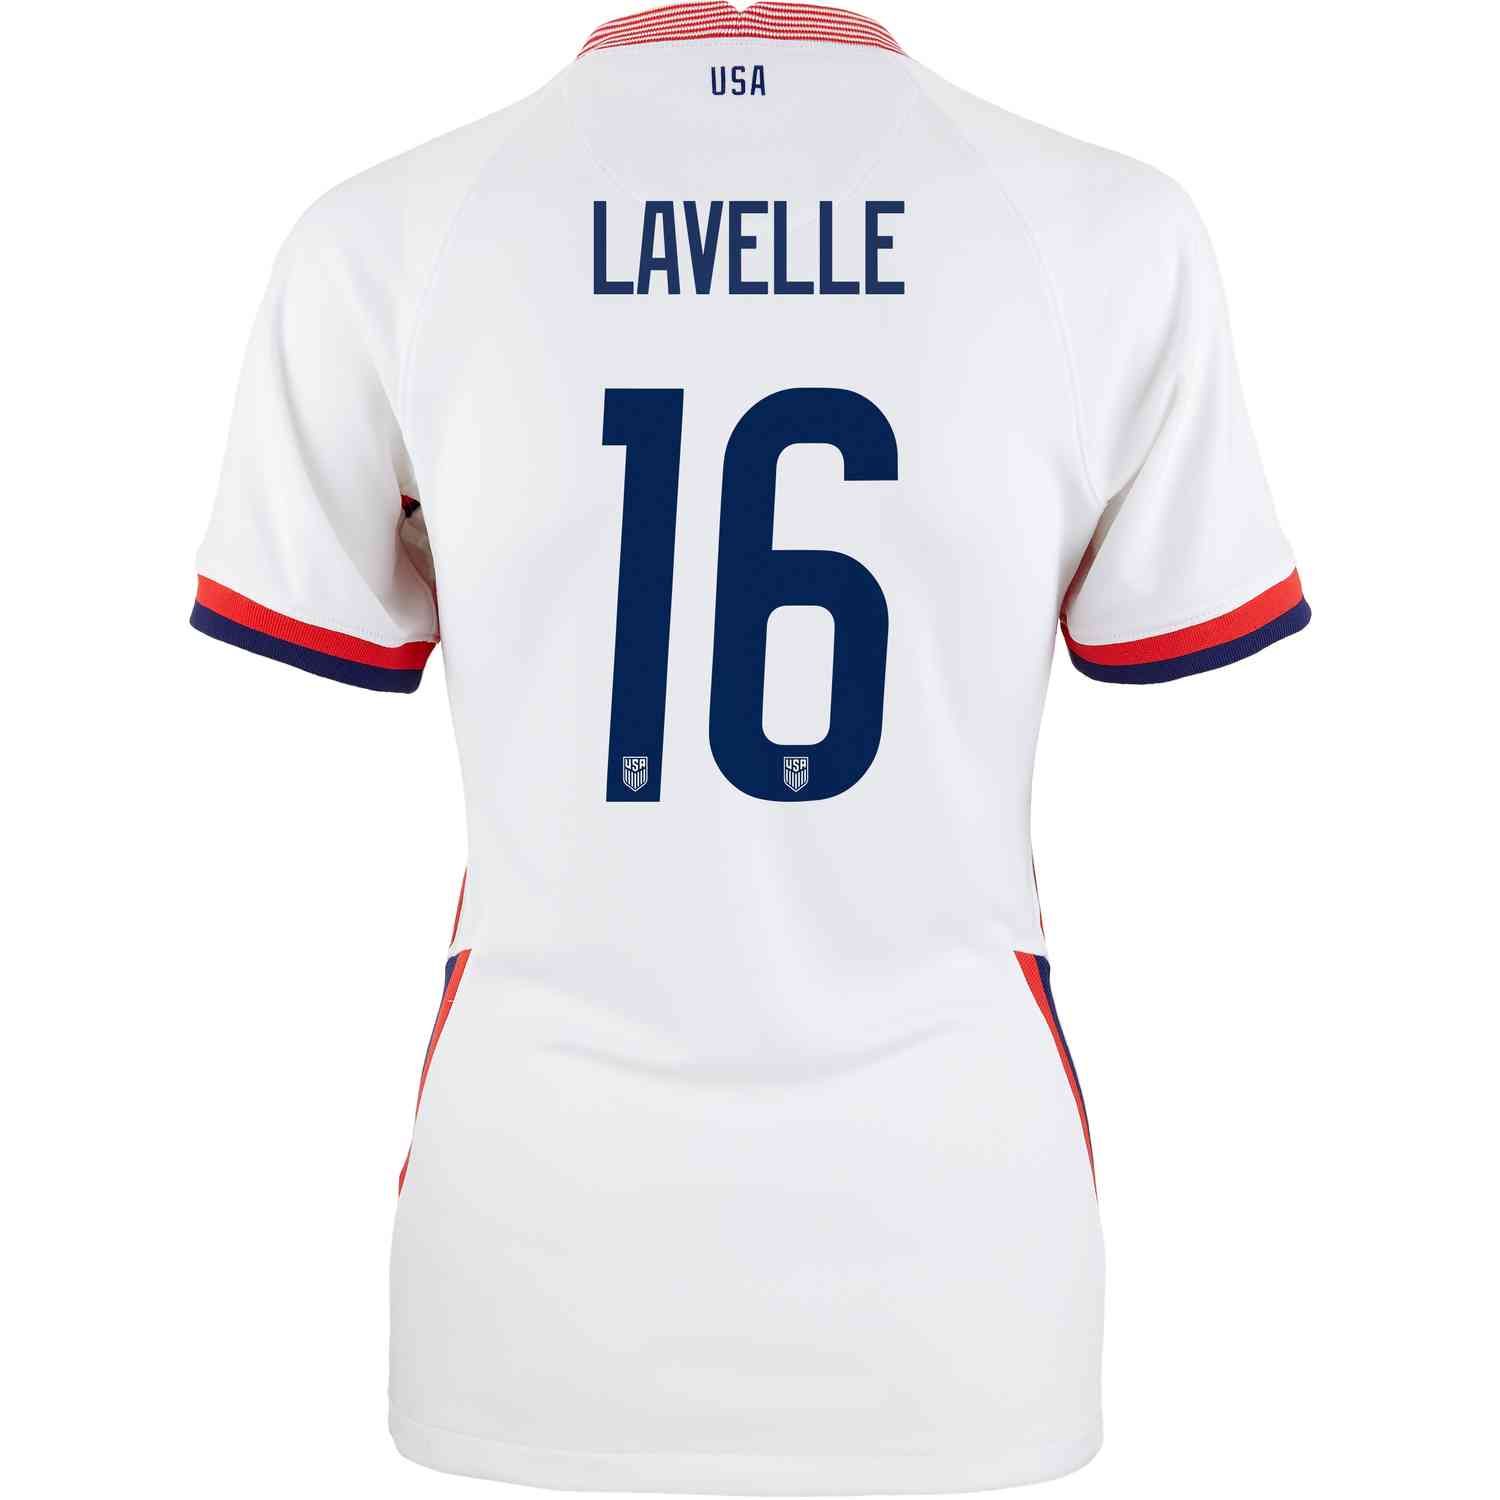 uswnt jersey lavelle